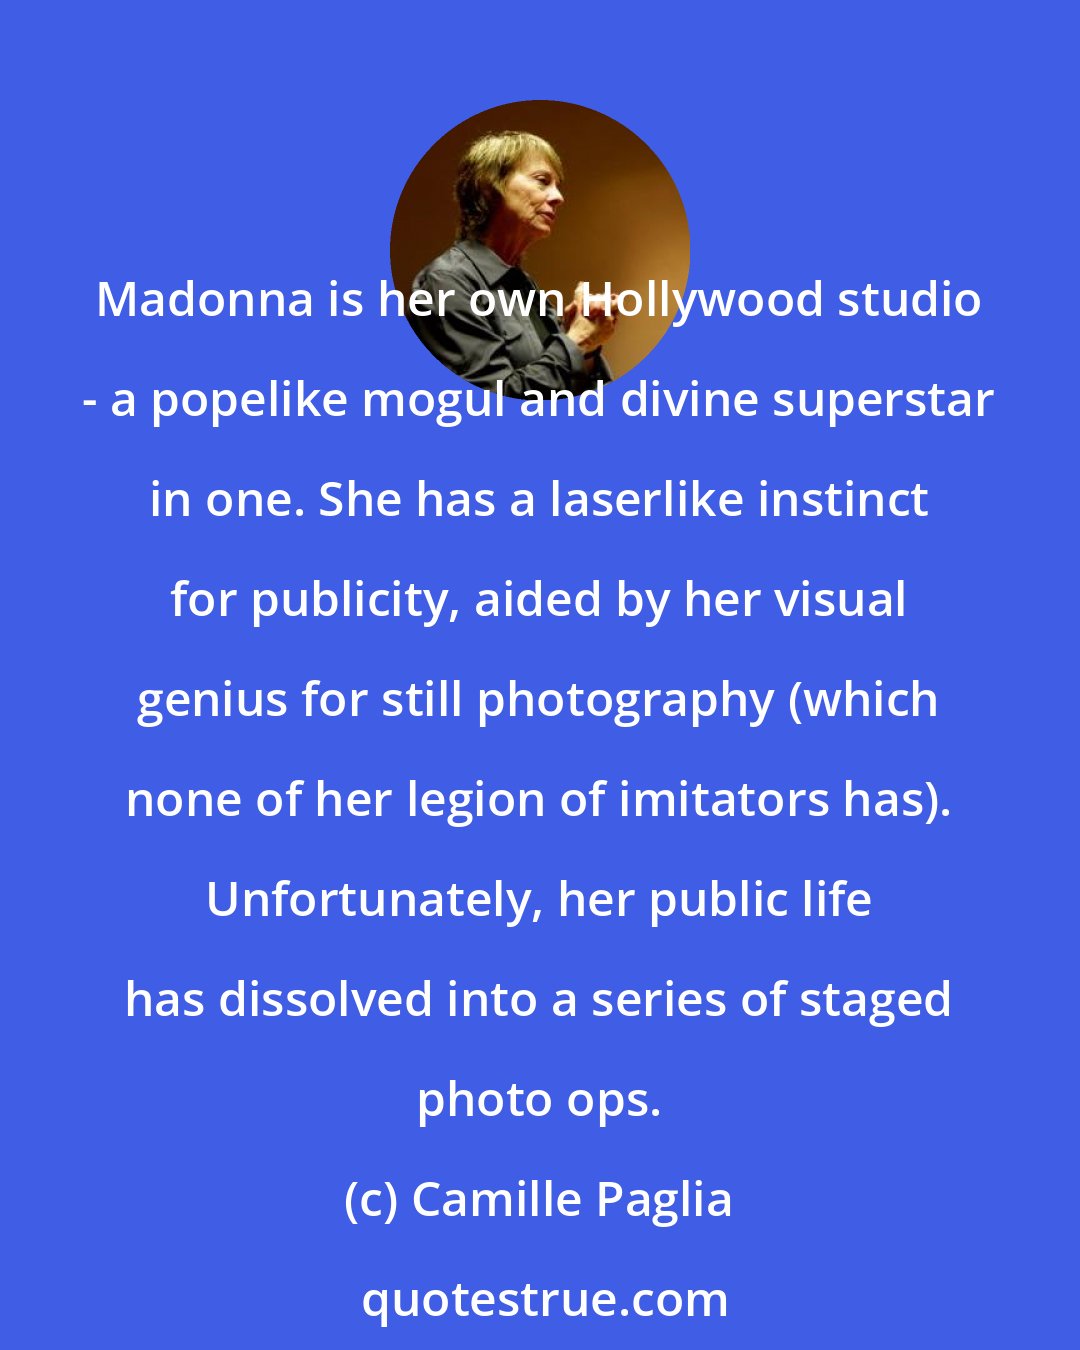 Camille Paglia: Madonna is her own Hollywood studio - a popelike mogul and divine superstar in one. She has a laserlike instinct for publicity, aided by her visual genius for still photography (which none of her legion of imitators has). Unfortunately, her public life has dissolved into a series of staged photo ops.